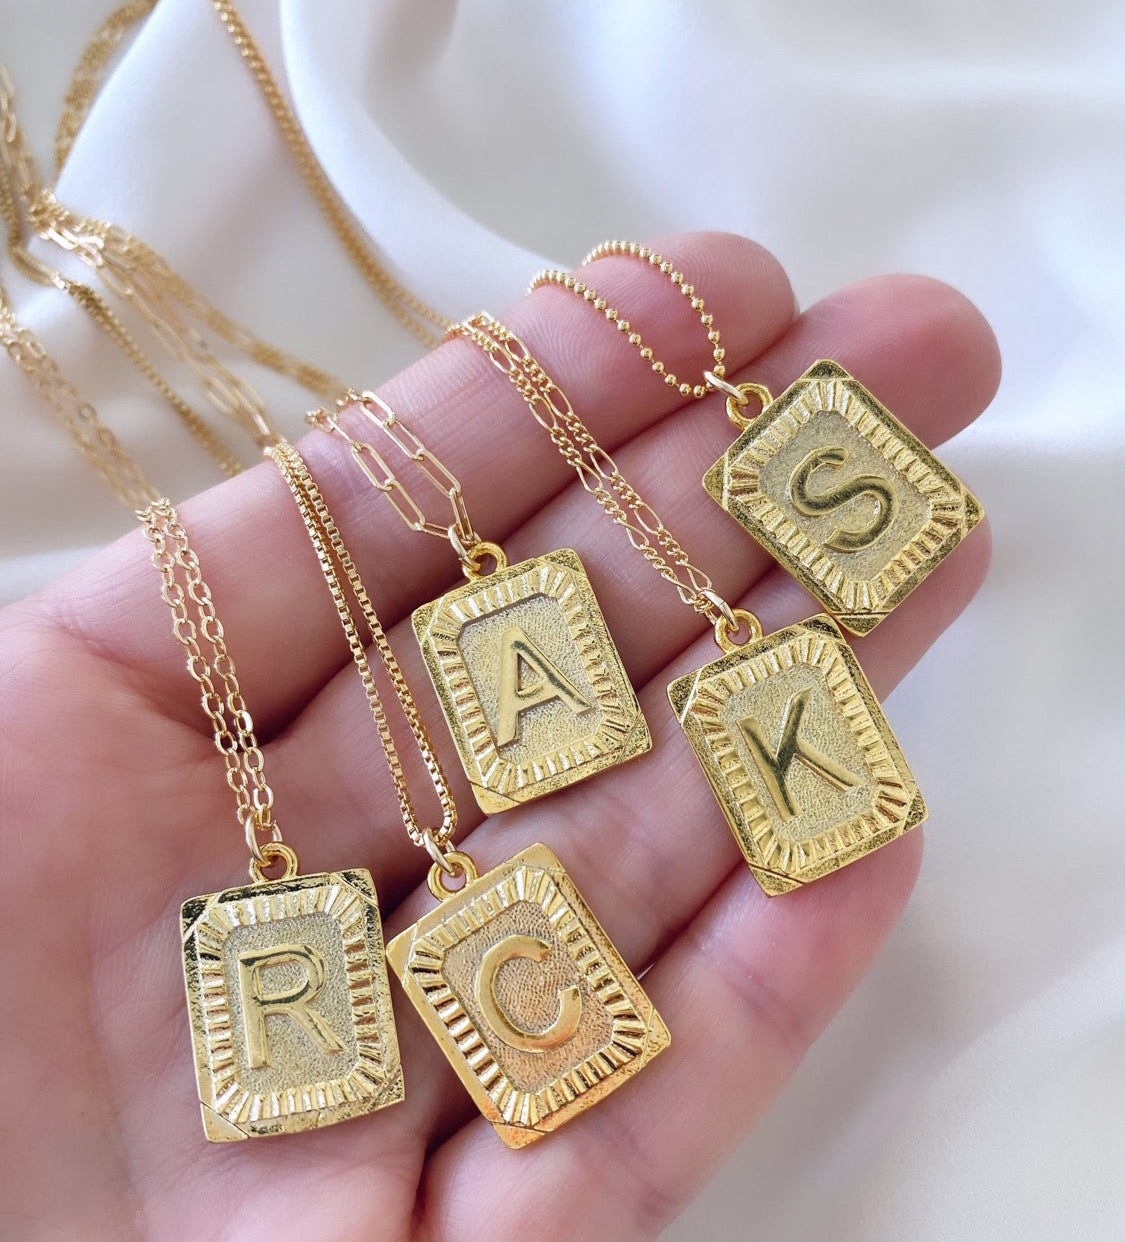 14k Gold Filled Personalized Initial Charm Initial Pendant, Letter